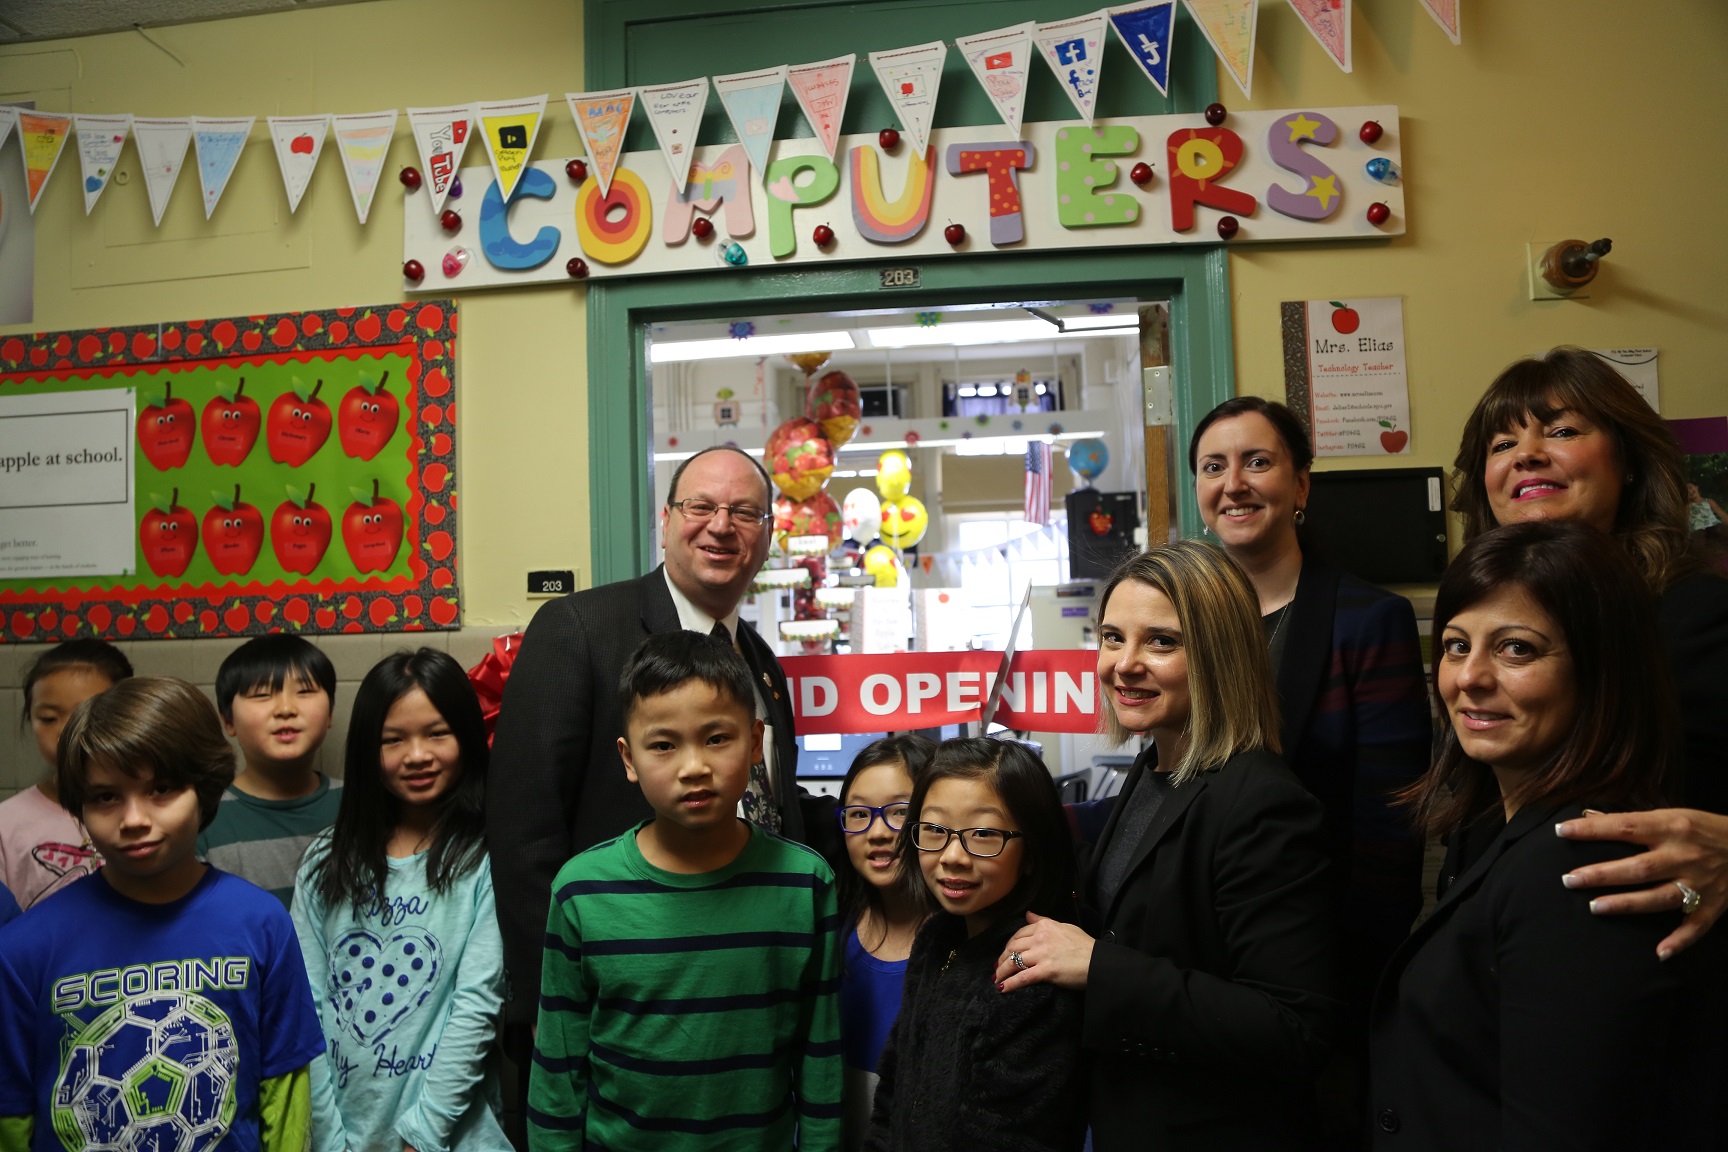 Kids, teachers and local officials at the unveiling of a new computer lab at P.S. 46.